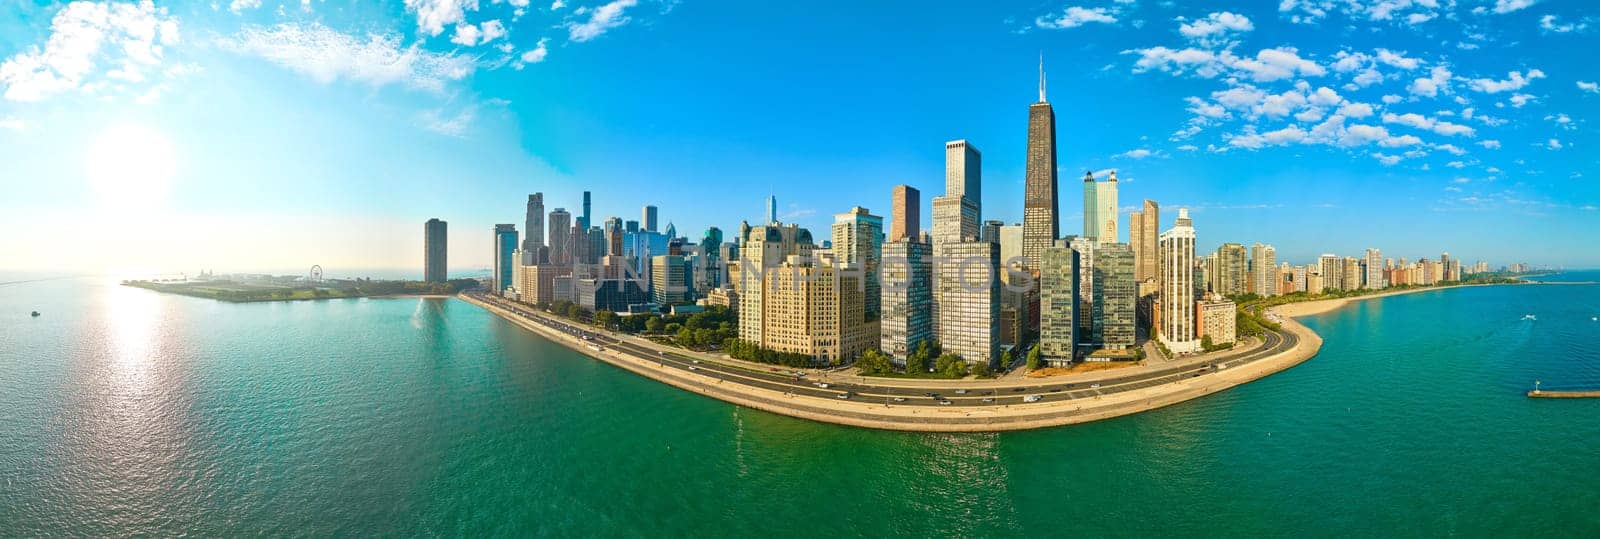 Aerial Chicago Skyline and Lake Michigan Shoreline Panorama by njproductions